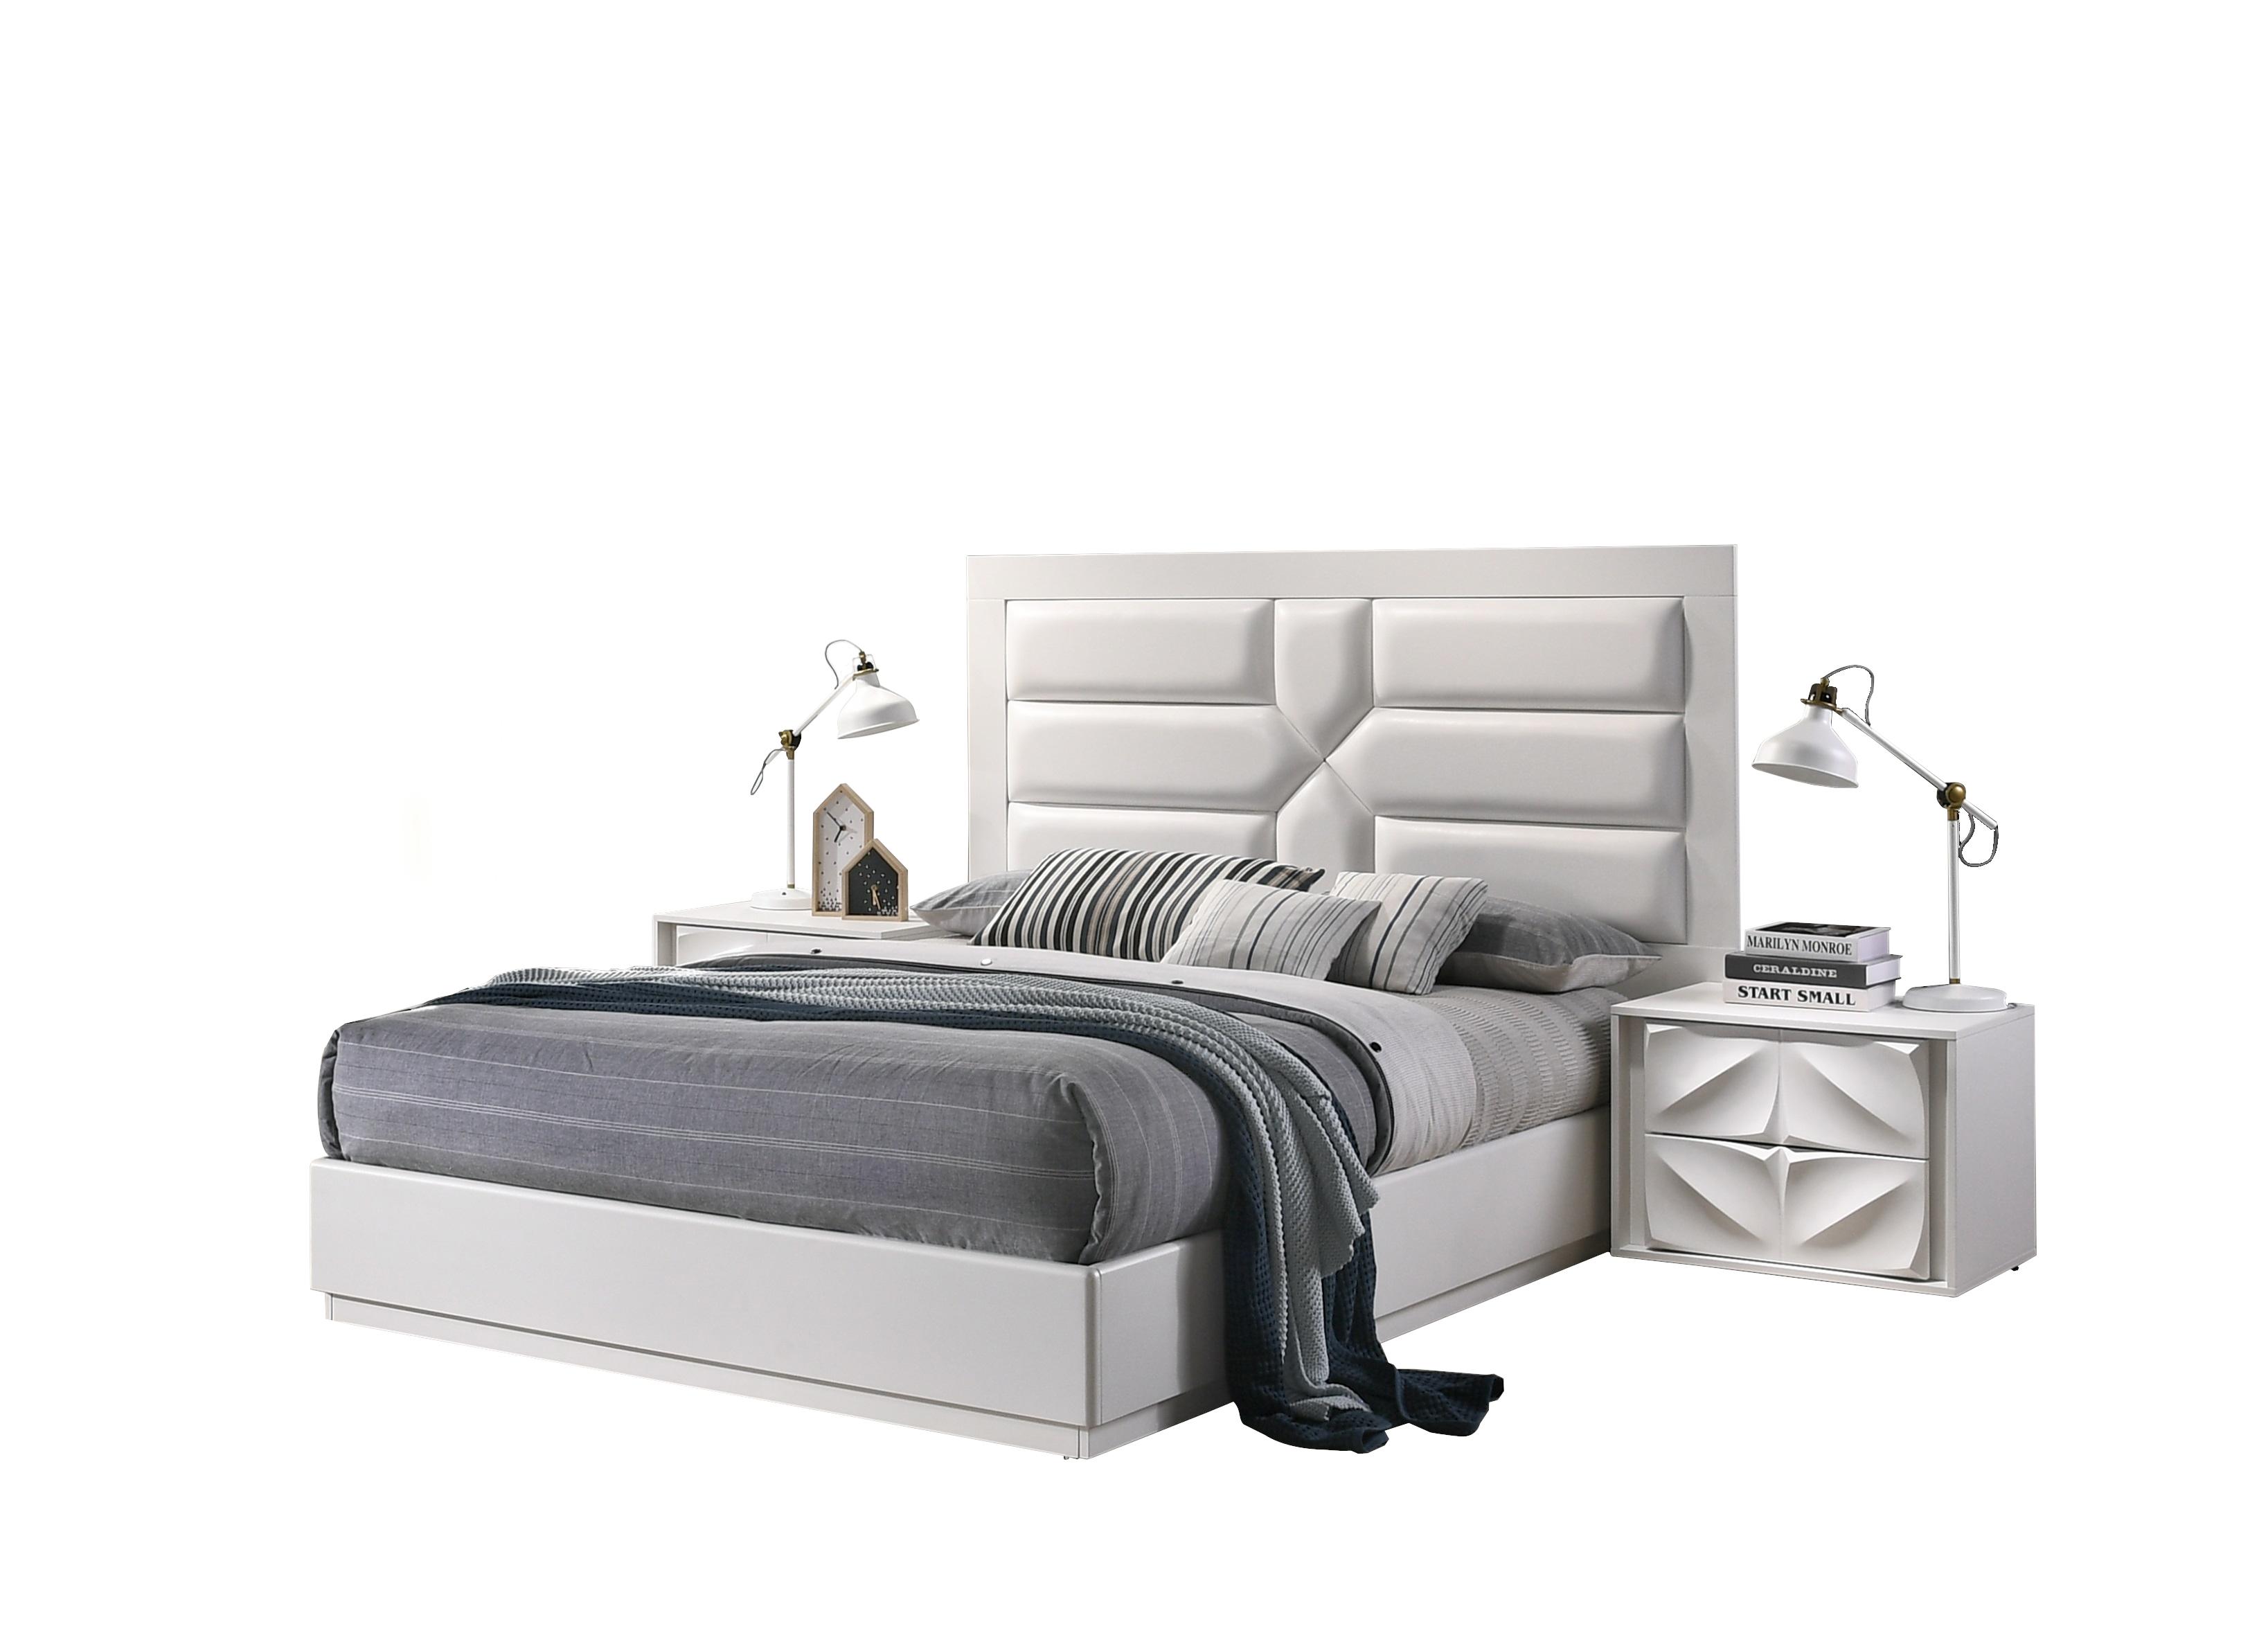 Contemporary Platform Bedroom Set Amsterdam AMSTERDAM-QUEEN-2N-3PC in White Leatherette